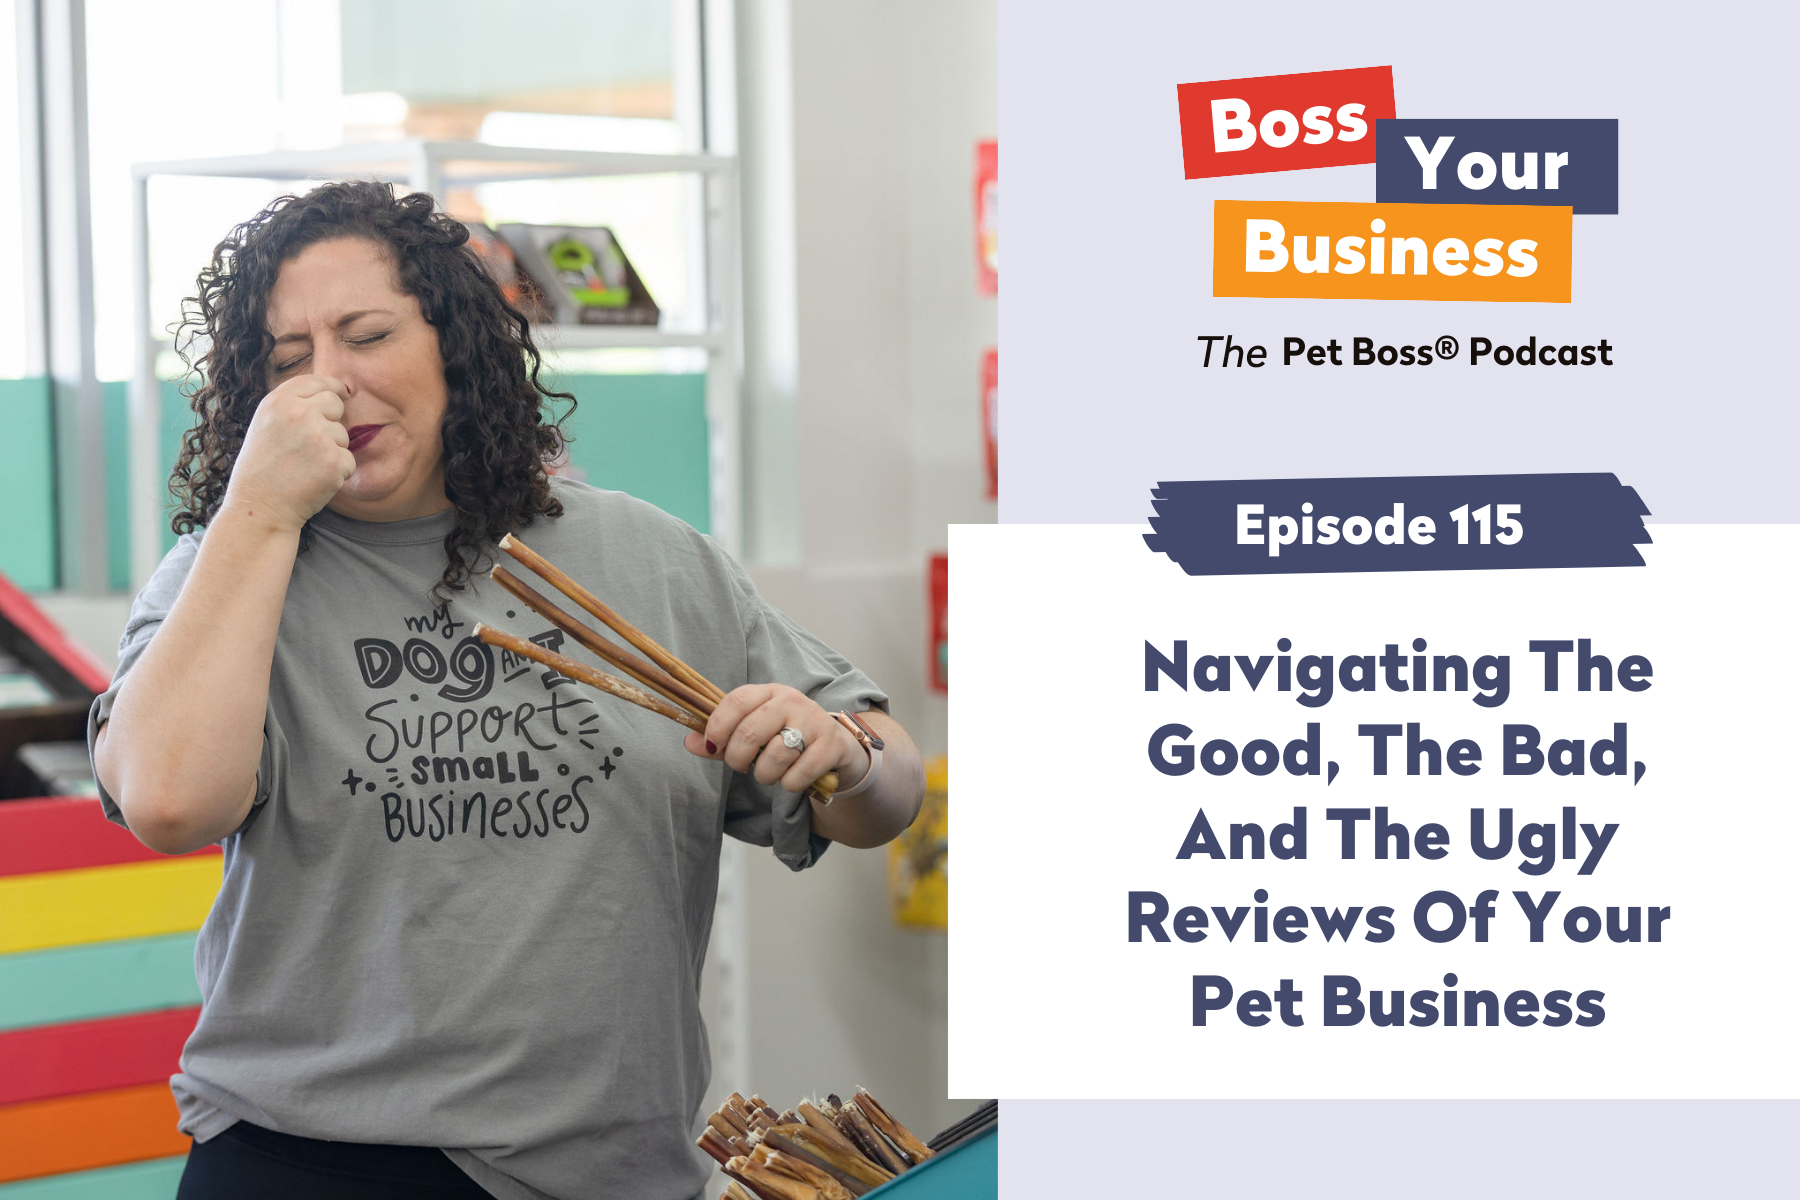 Pet Boss Nation Boss Your Business Podcast Episode Navigating The Good, The Bad, And The Ugly Reviews Of Your Pet Business